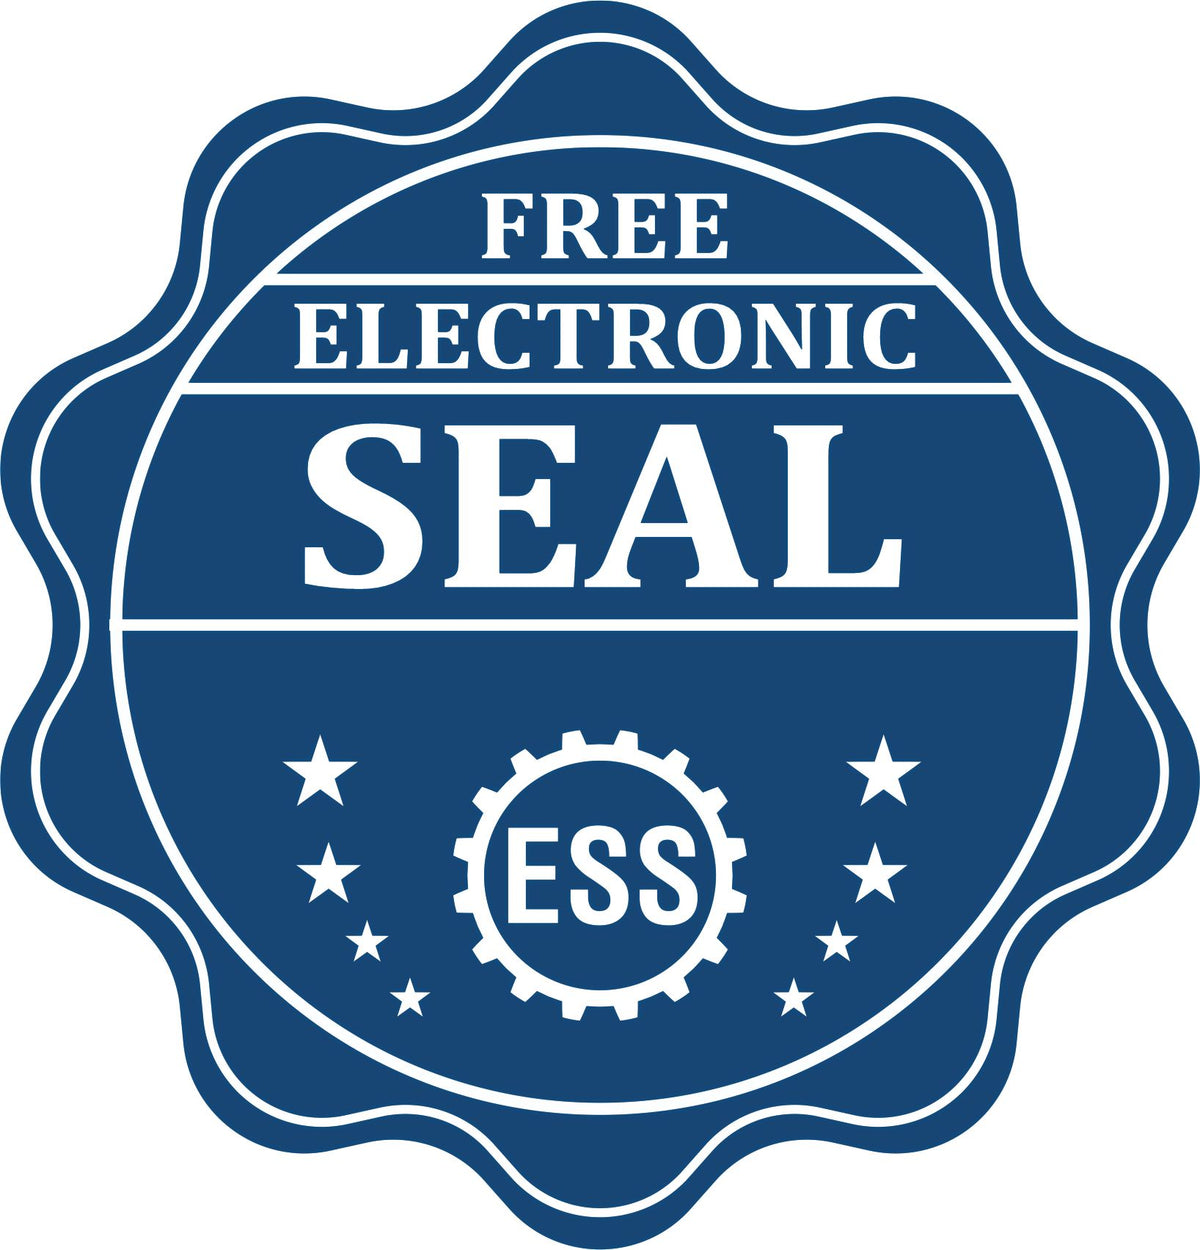 A badge showing a free electronic seal for the District of Columbia Desk Architect Embossing Seal with stars and the ESS gear on the emblem.